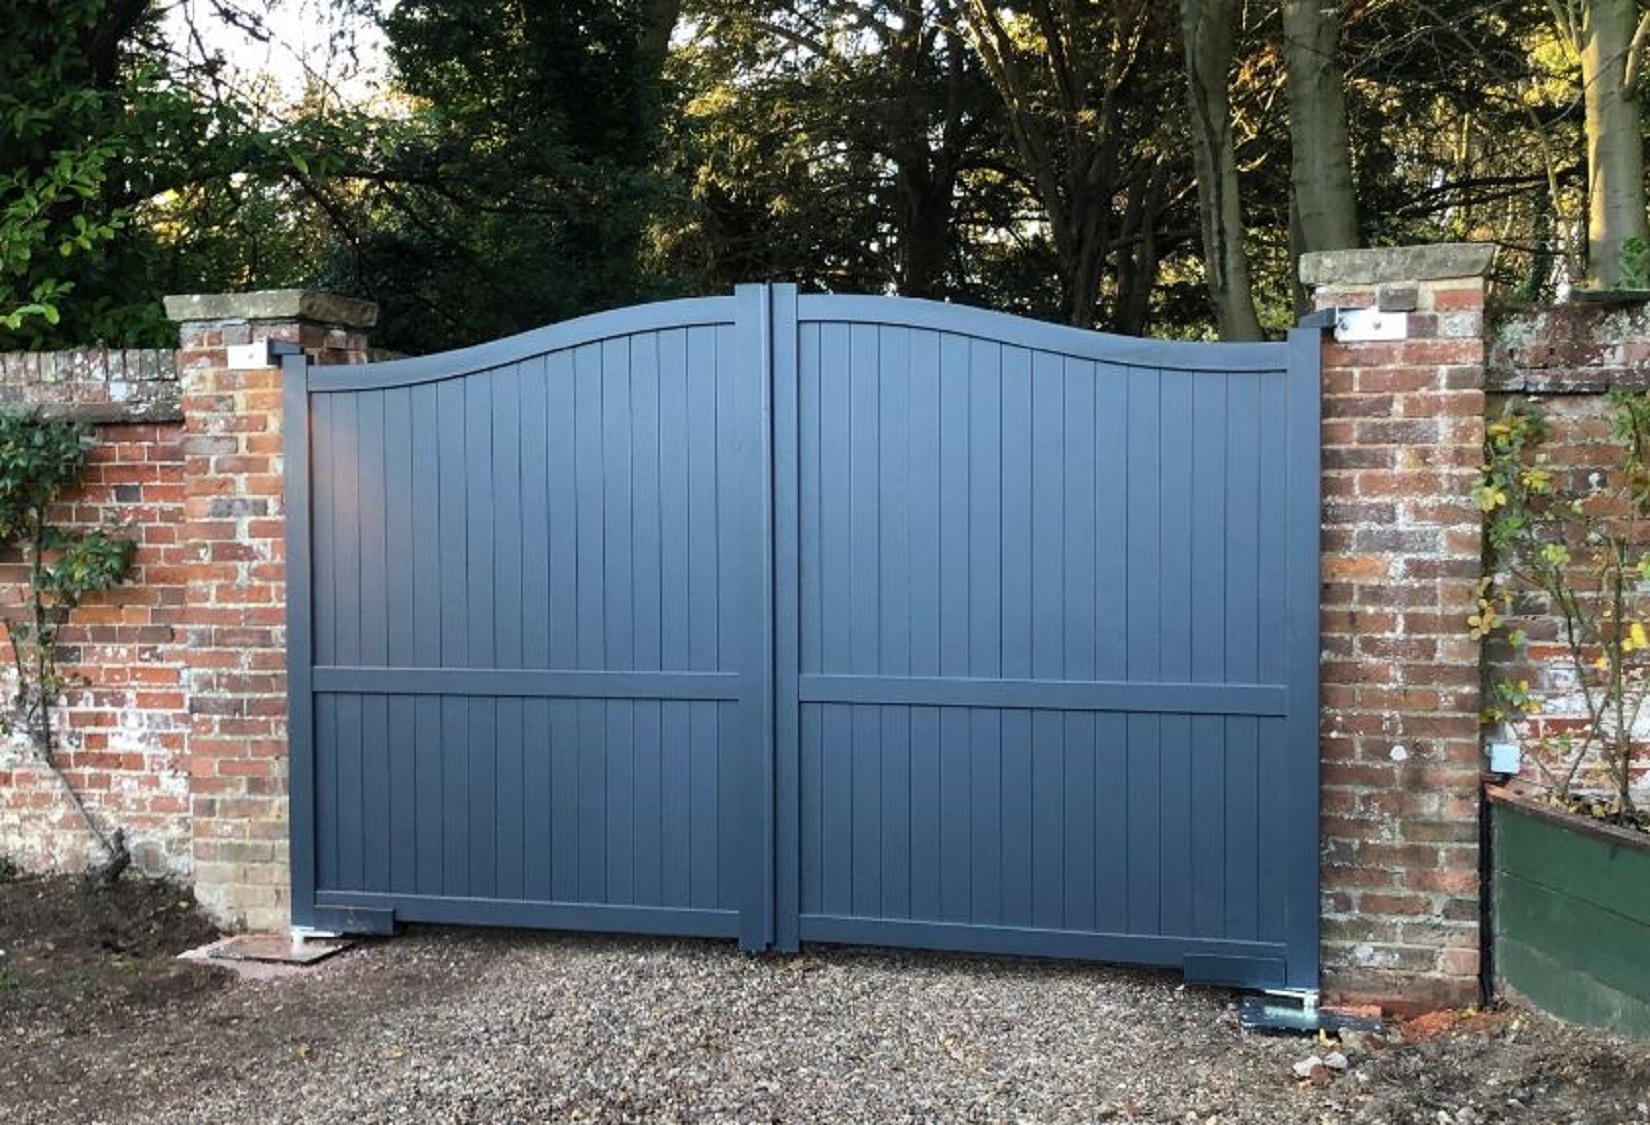 Readymade Anthracite Grey Aluminium Bell Curved Top Double Swing Driveway Gate - 3750mm Width